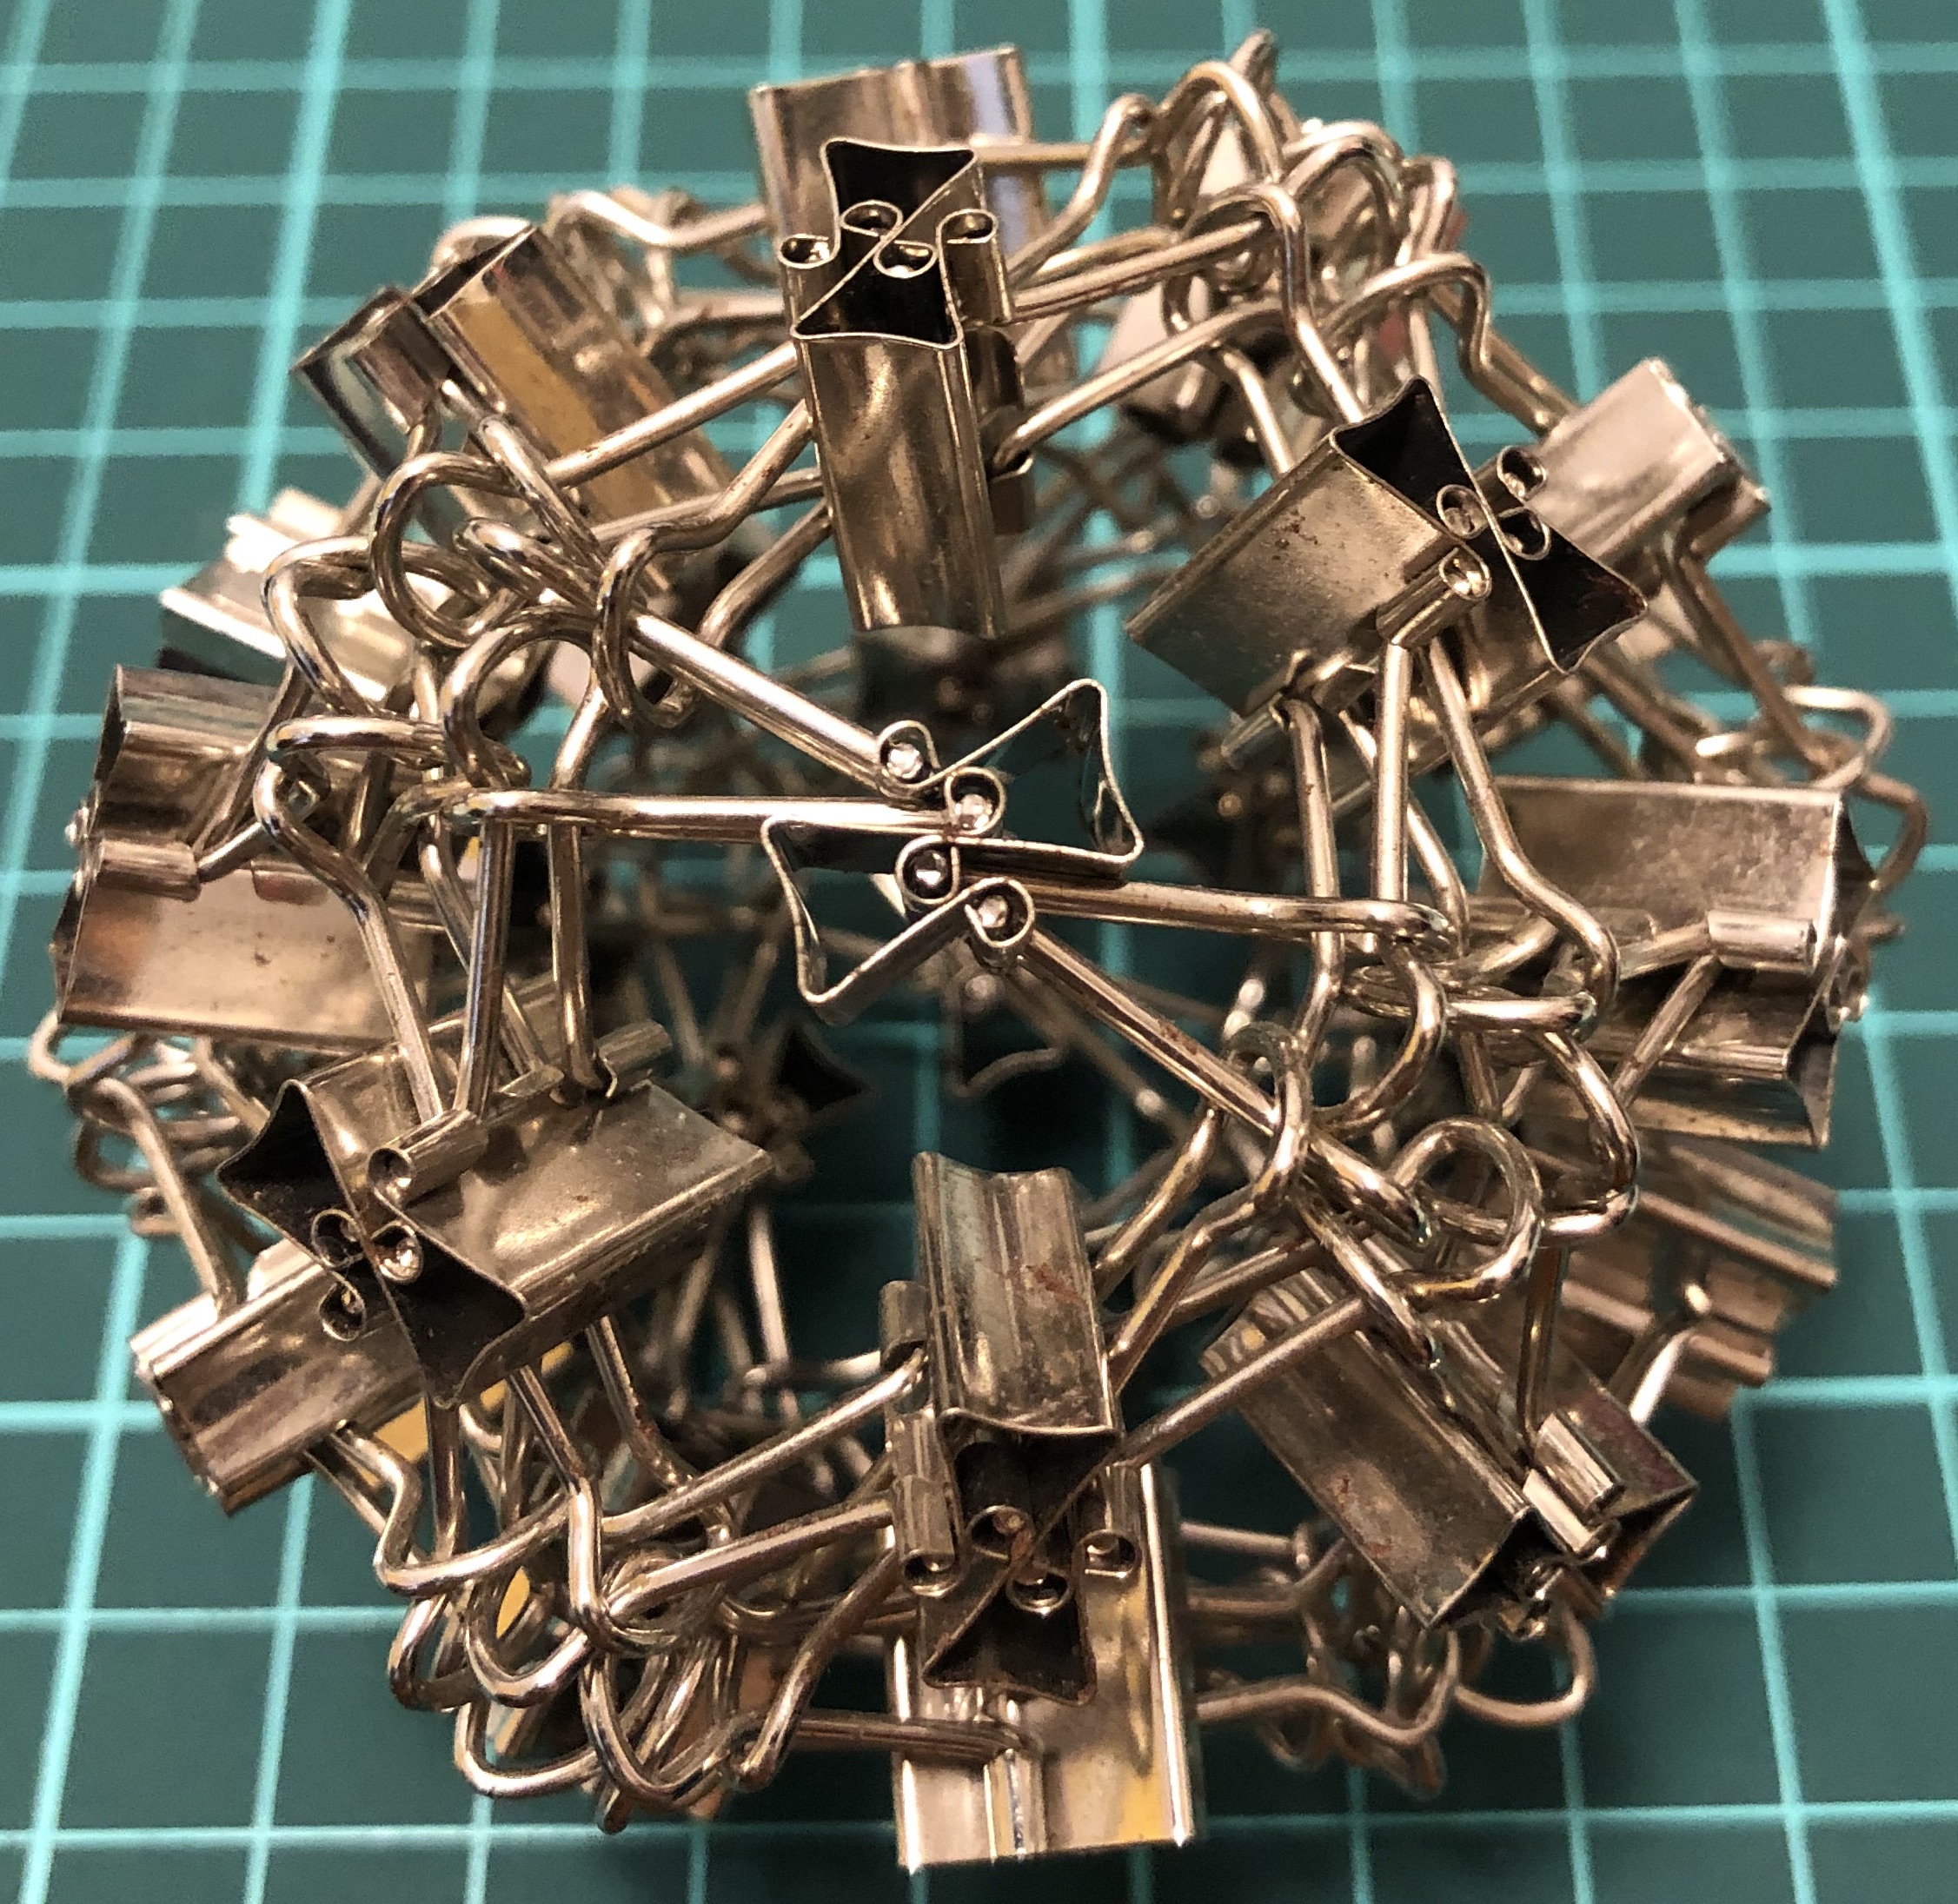 60 clips forming 30 I-edges forming icosahedron